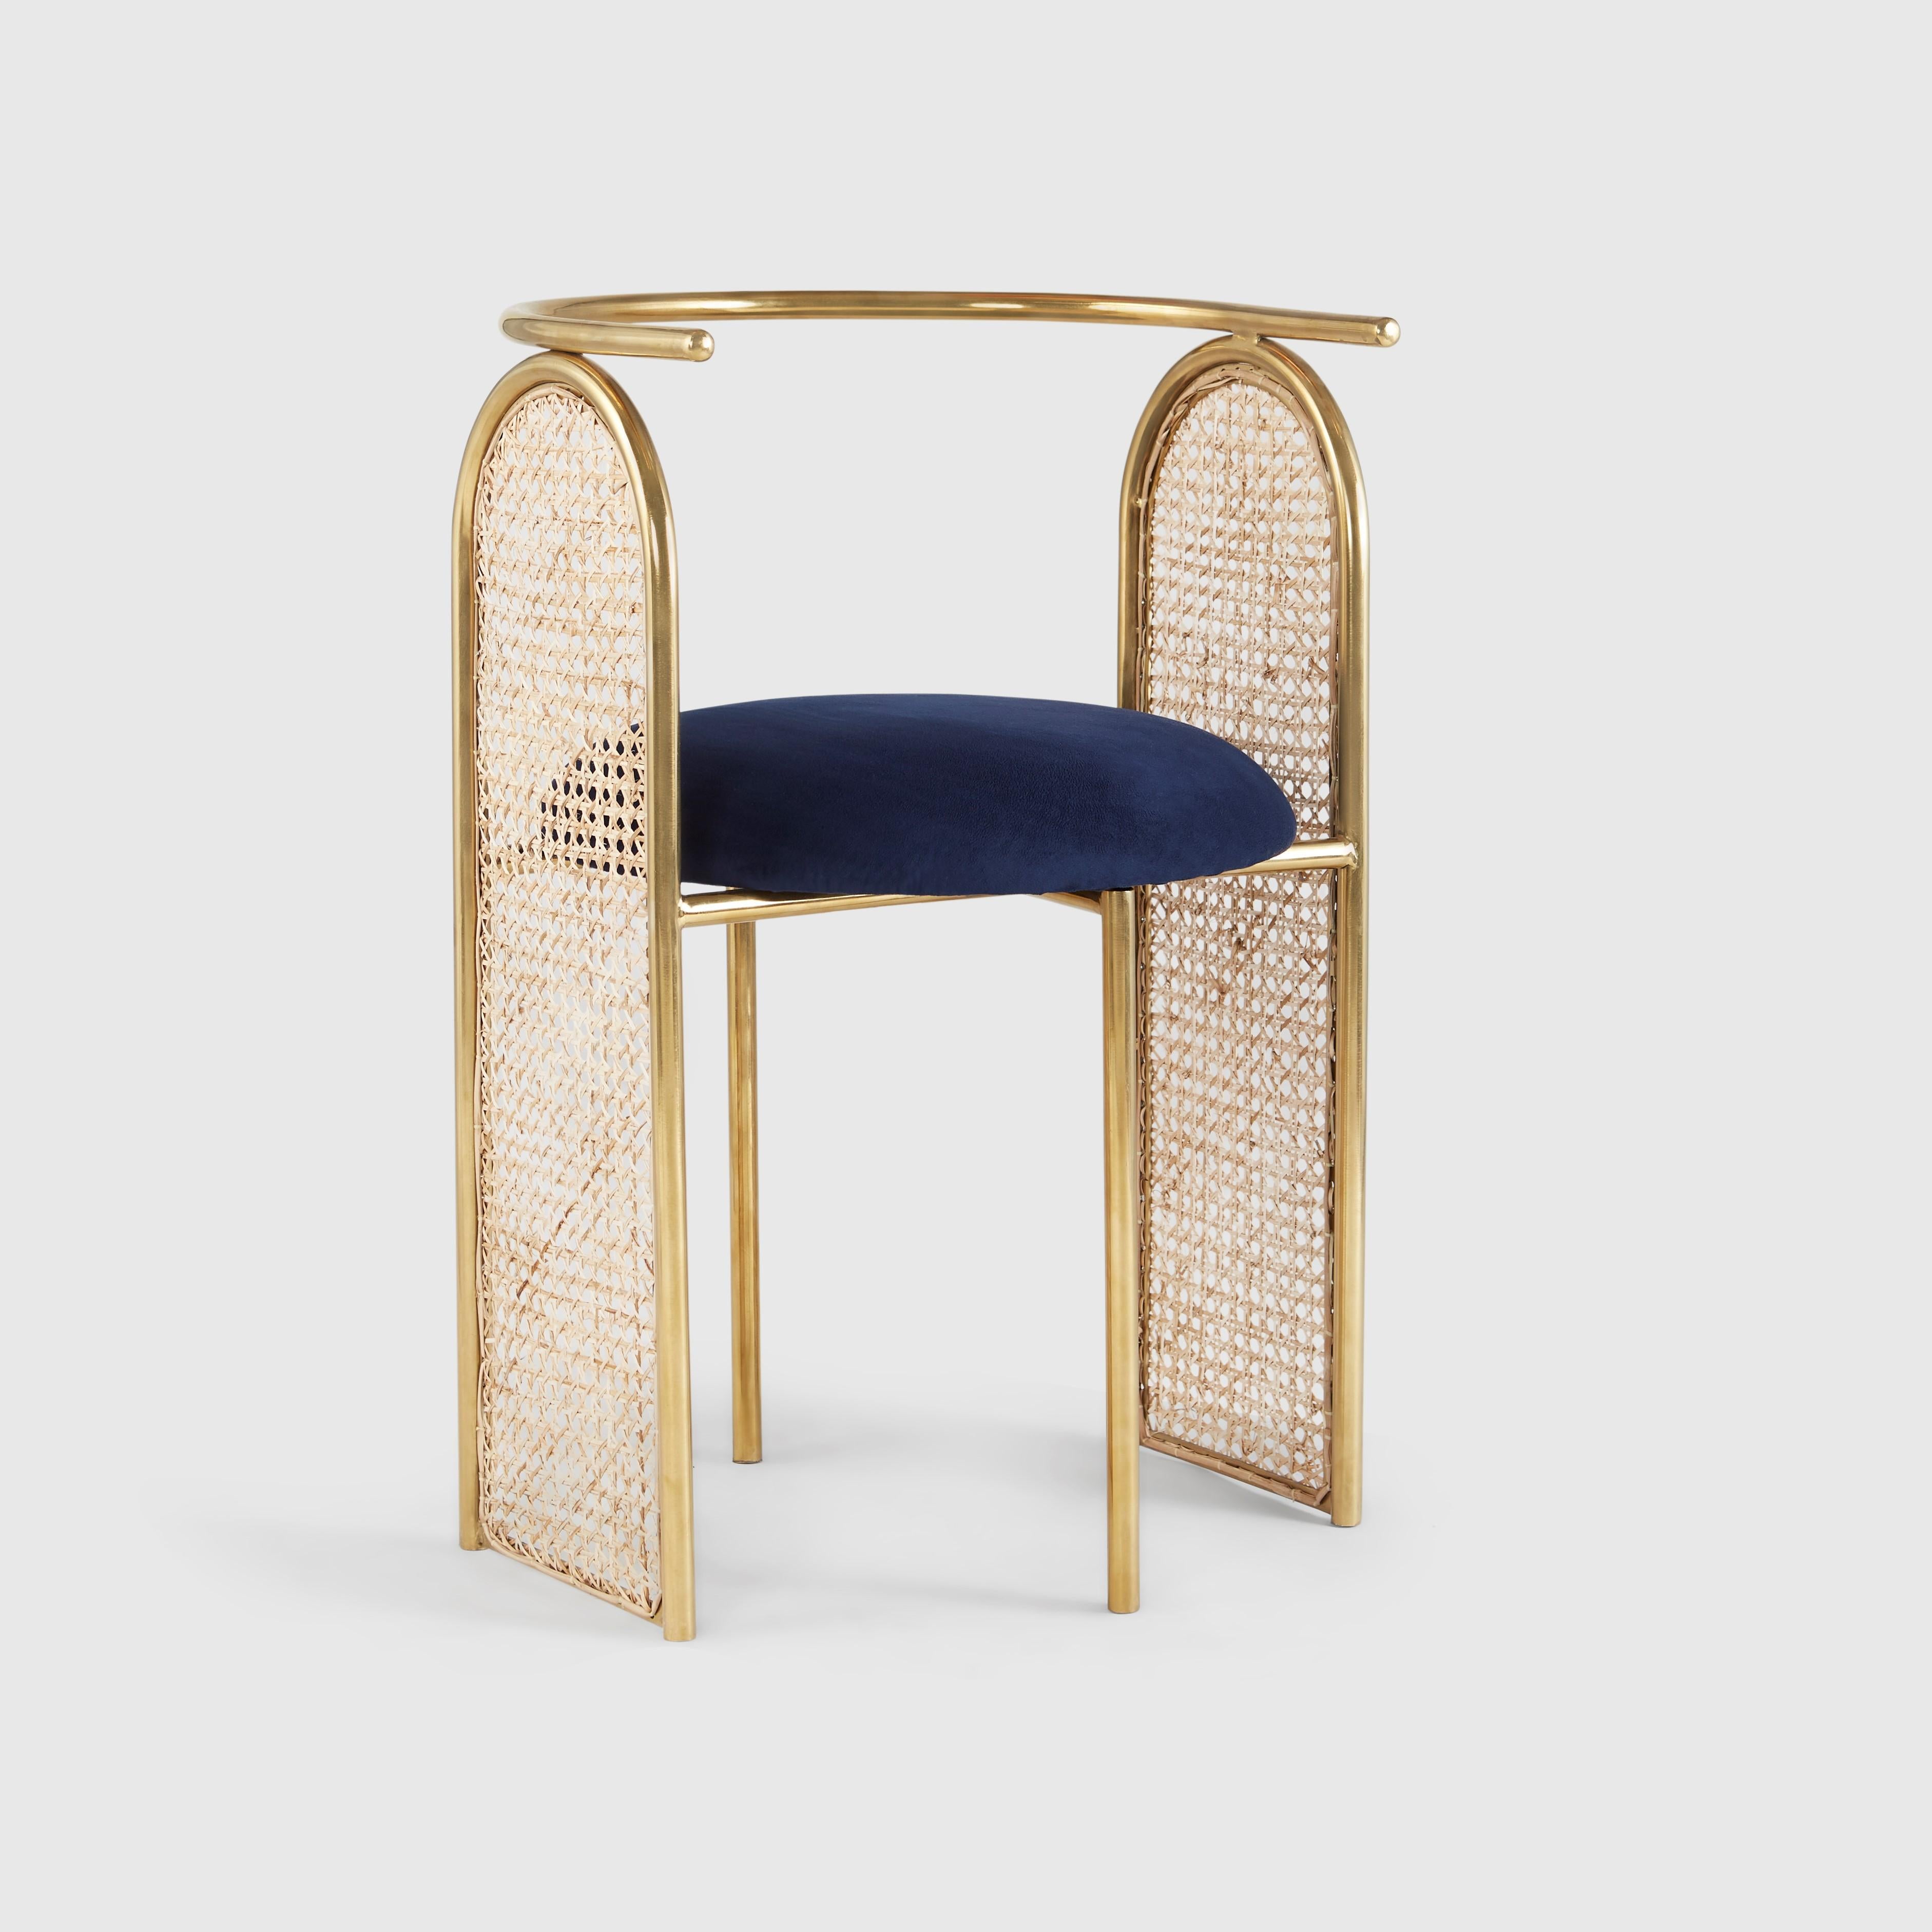 Unique Arco chair gold by Hatsu
Dimensions: D 48 x W 48 x H 74 cm 
Materials: Uphostered seating on powdercoated steel frame

Hatsu is a design studio based in Mumbai that creates modern lighting that are unique and immediately recognisable. We